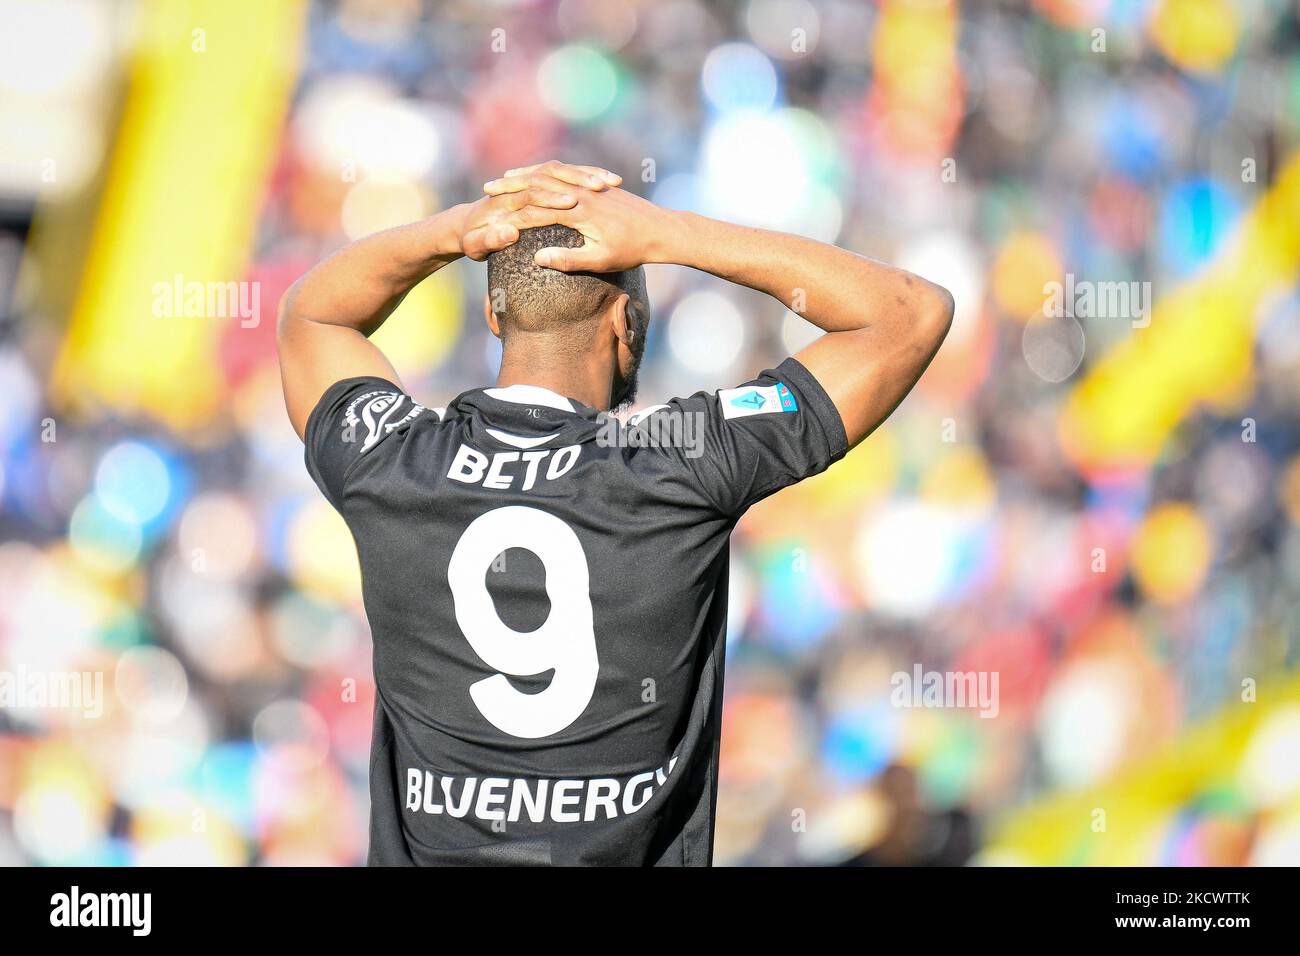 Norberto Bercique Gomes Betuncal (Udinese) reacts after missing the goal during the italian soccer Serie A match Udinese Calcio vs Genoa CFC on November 28, 2021 at the Friuli - Dacia Arena stadium in Udine, Italy (Photo by Ettore Griffoni/LiveMedia/NurPhoto) Stock Photo